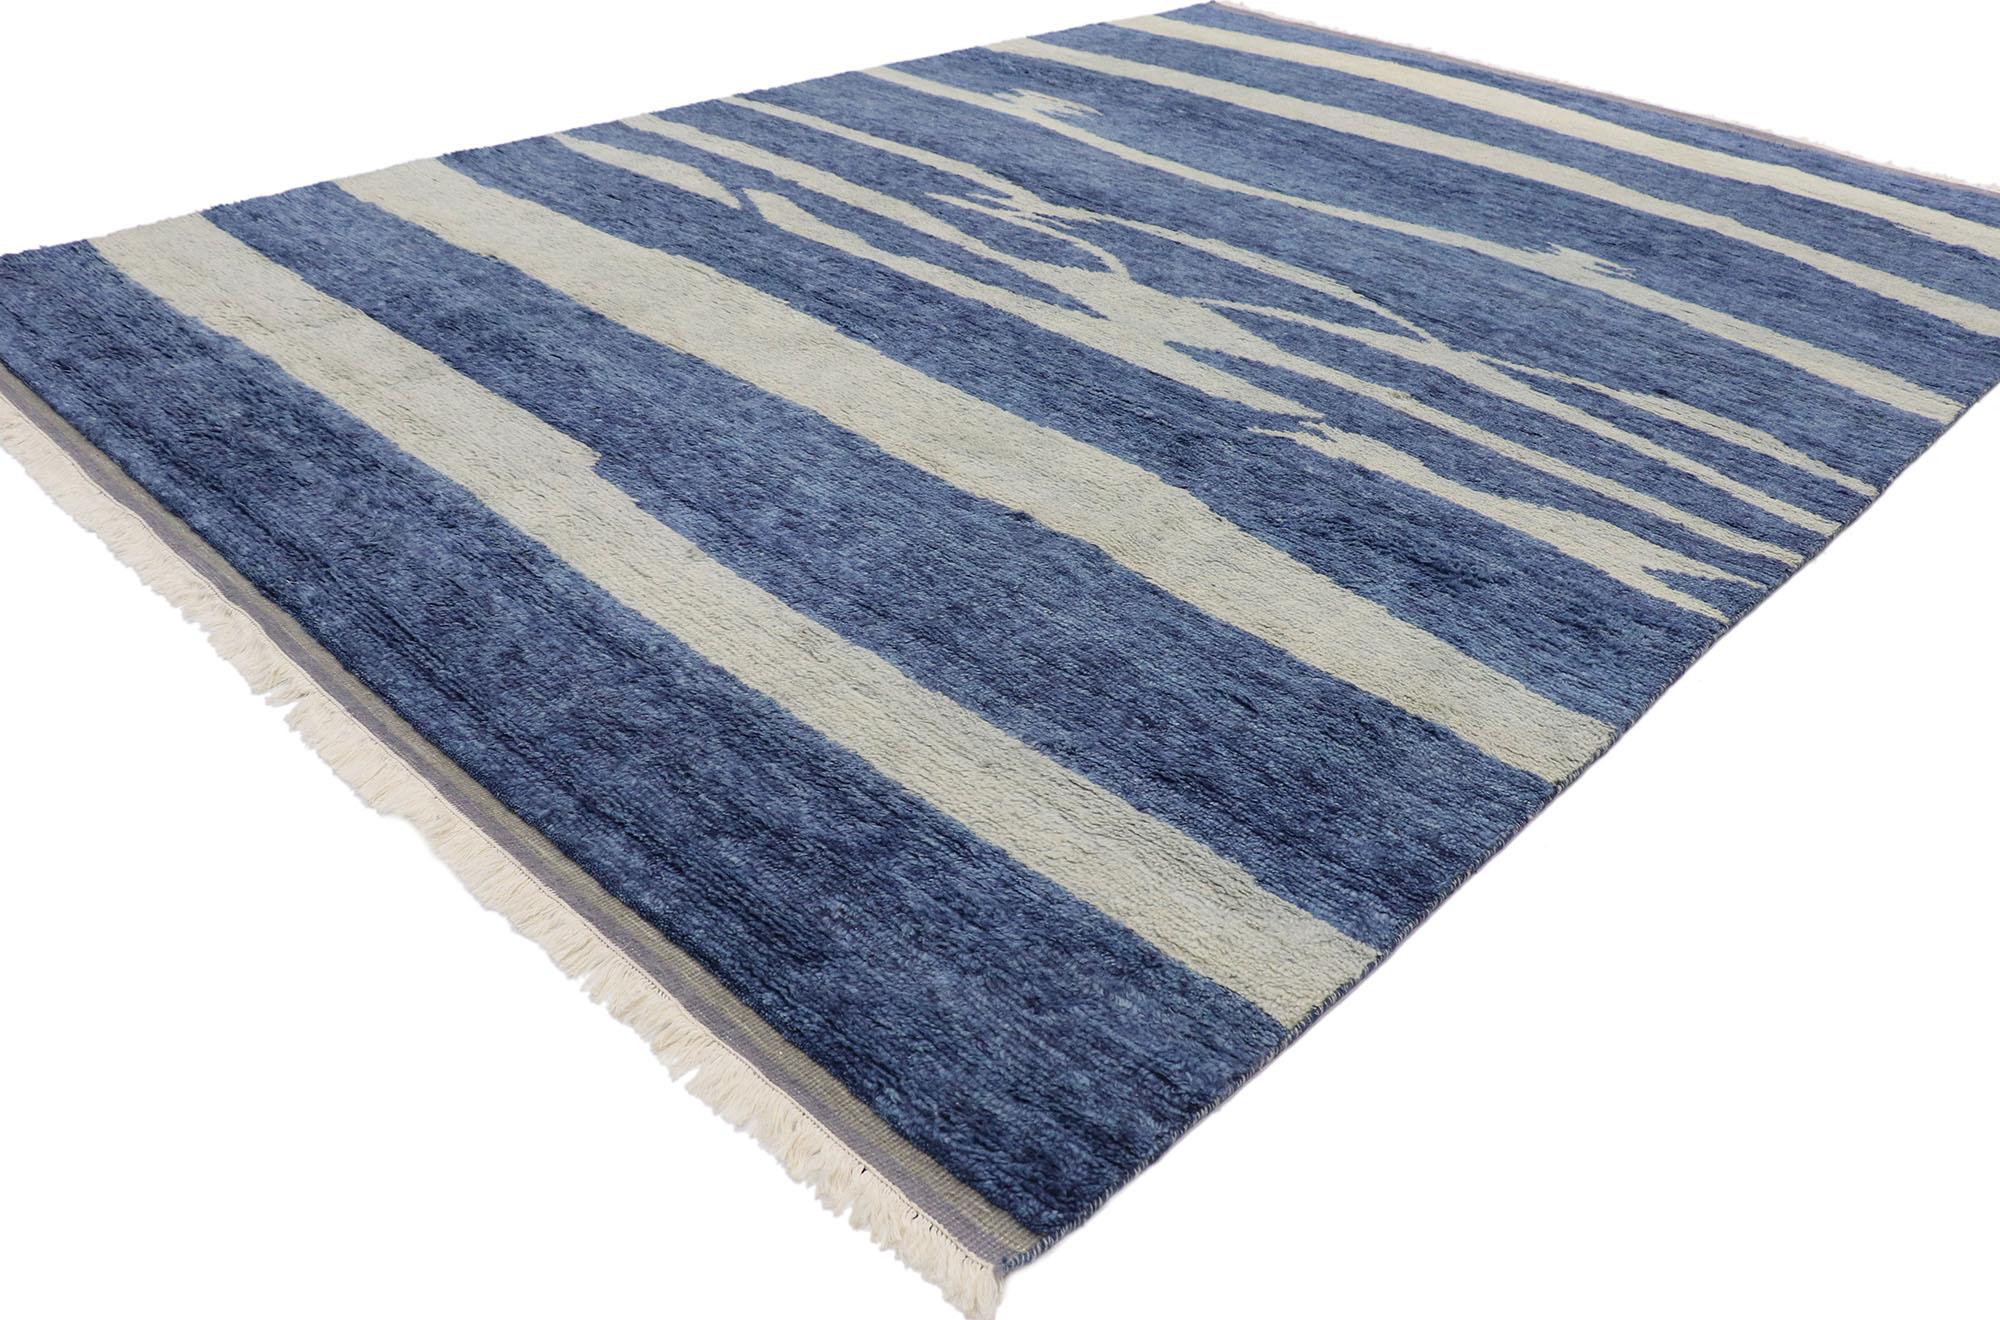 30542, new contemporary Moroccan Beach style rug with Coastal design. Coast into contemporary beach style and cozy contentment with this hand knotted wool contemporary Moroccan area rug. Showcasing a bold expressive design, incredible detail and